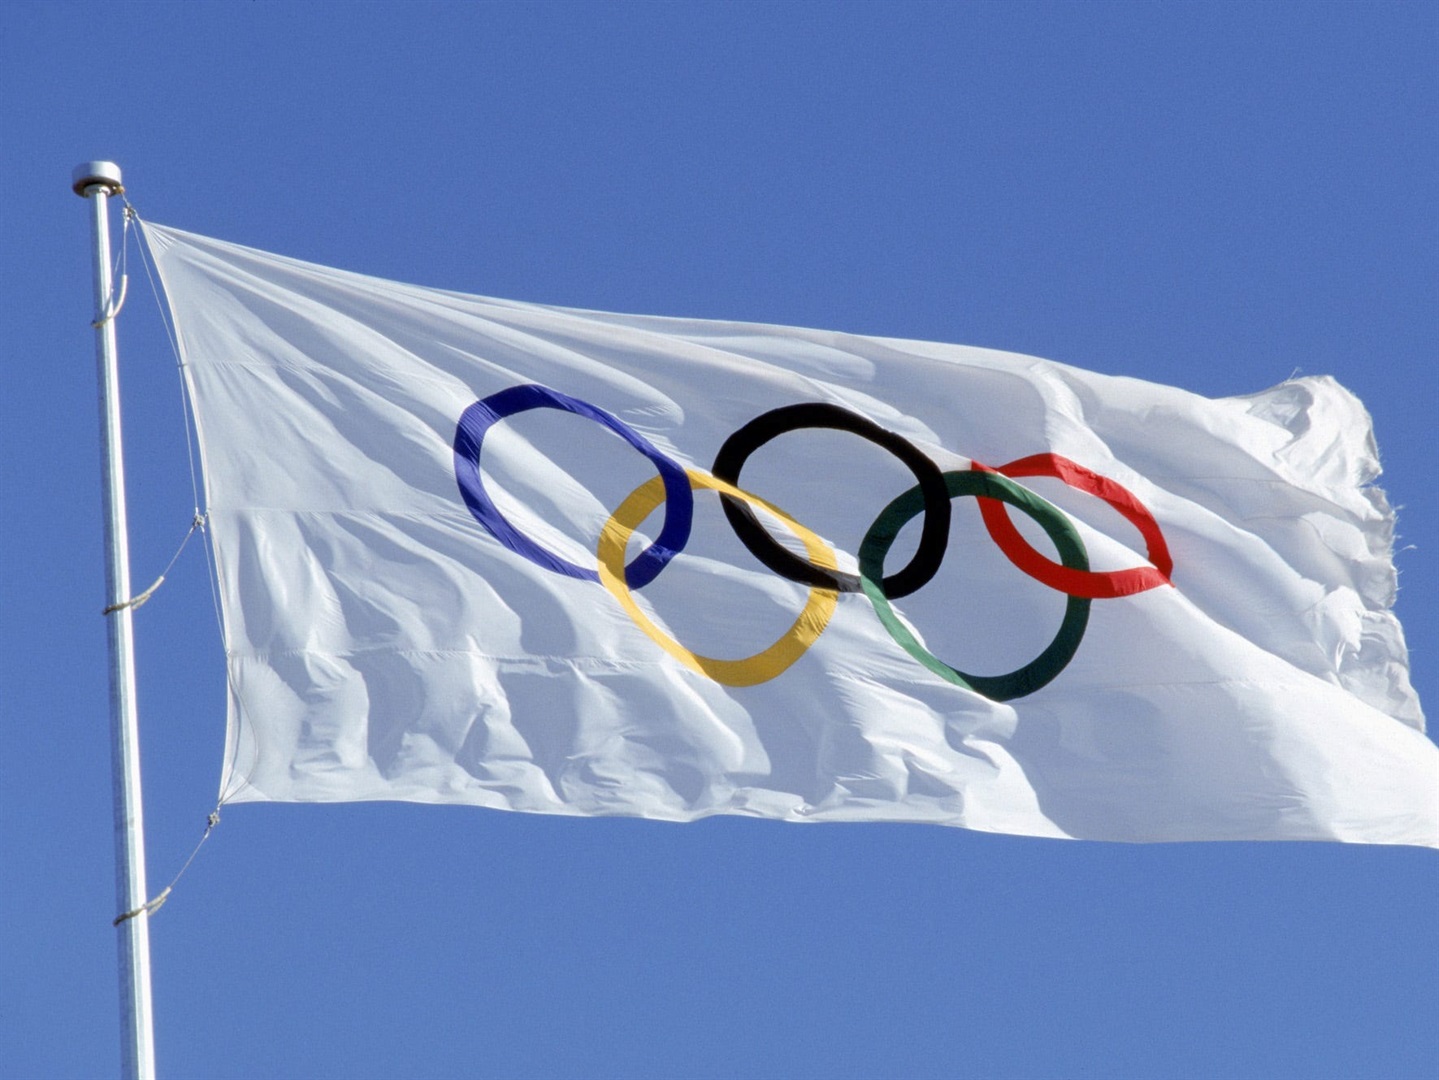 The former president of a major Japanese advertising firm pleaded guilty to bribing an official to secure a sponsorship contract for the Tokyo Olympic Games.  